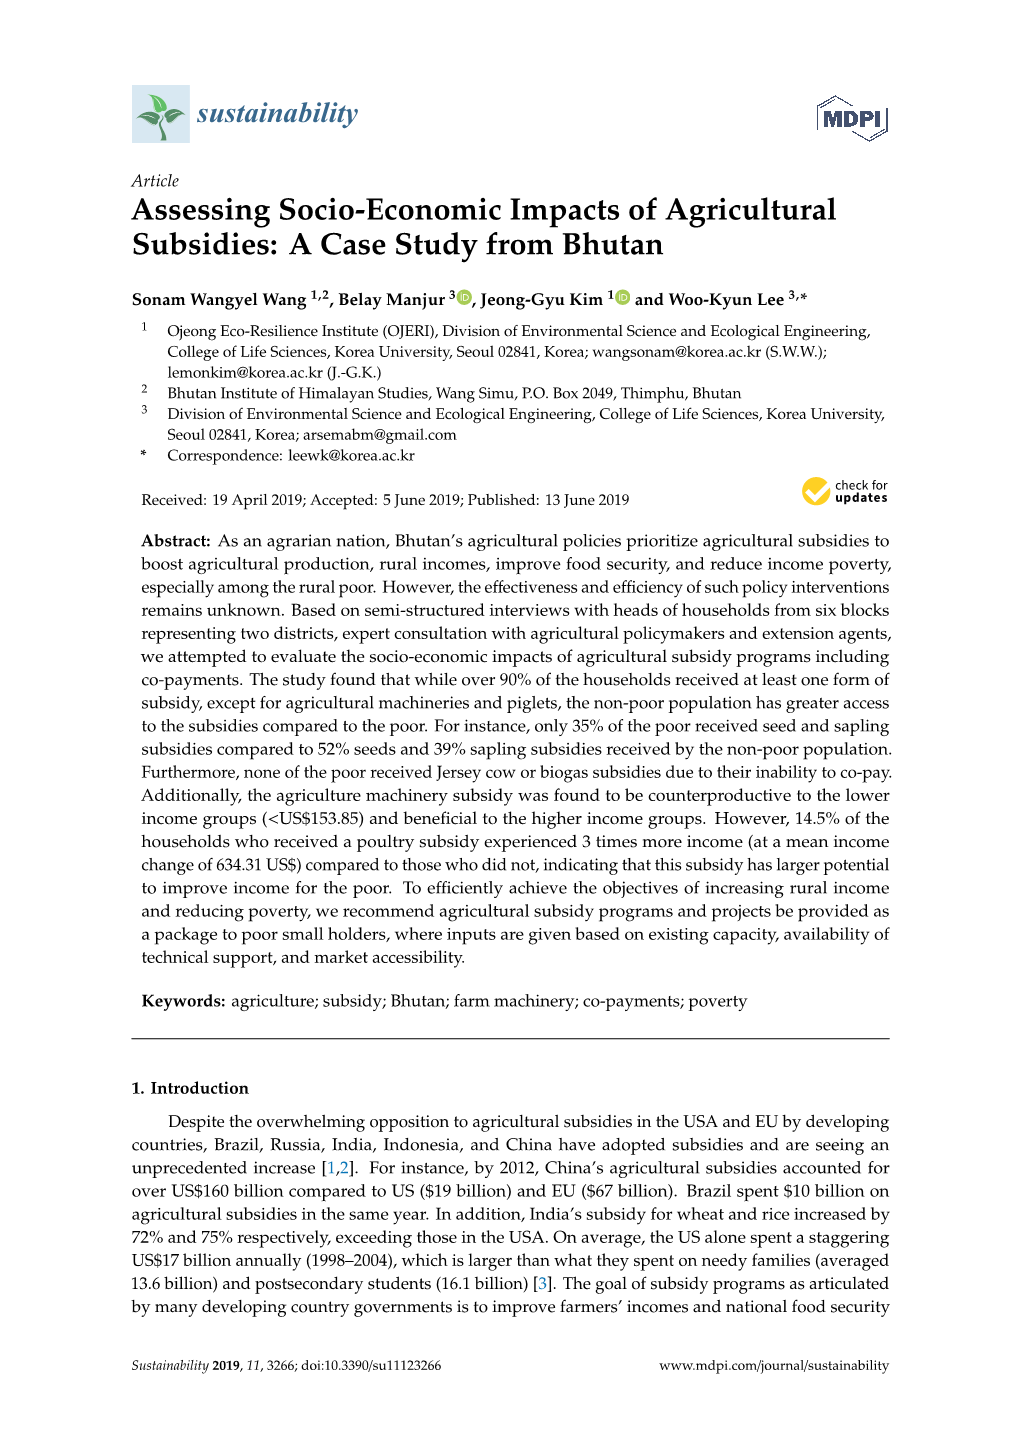 Assessing Socio-Economic Impacts of Agricultural Subsidies: a Case Study from Bhutan